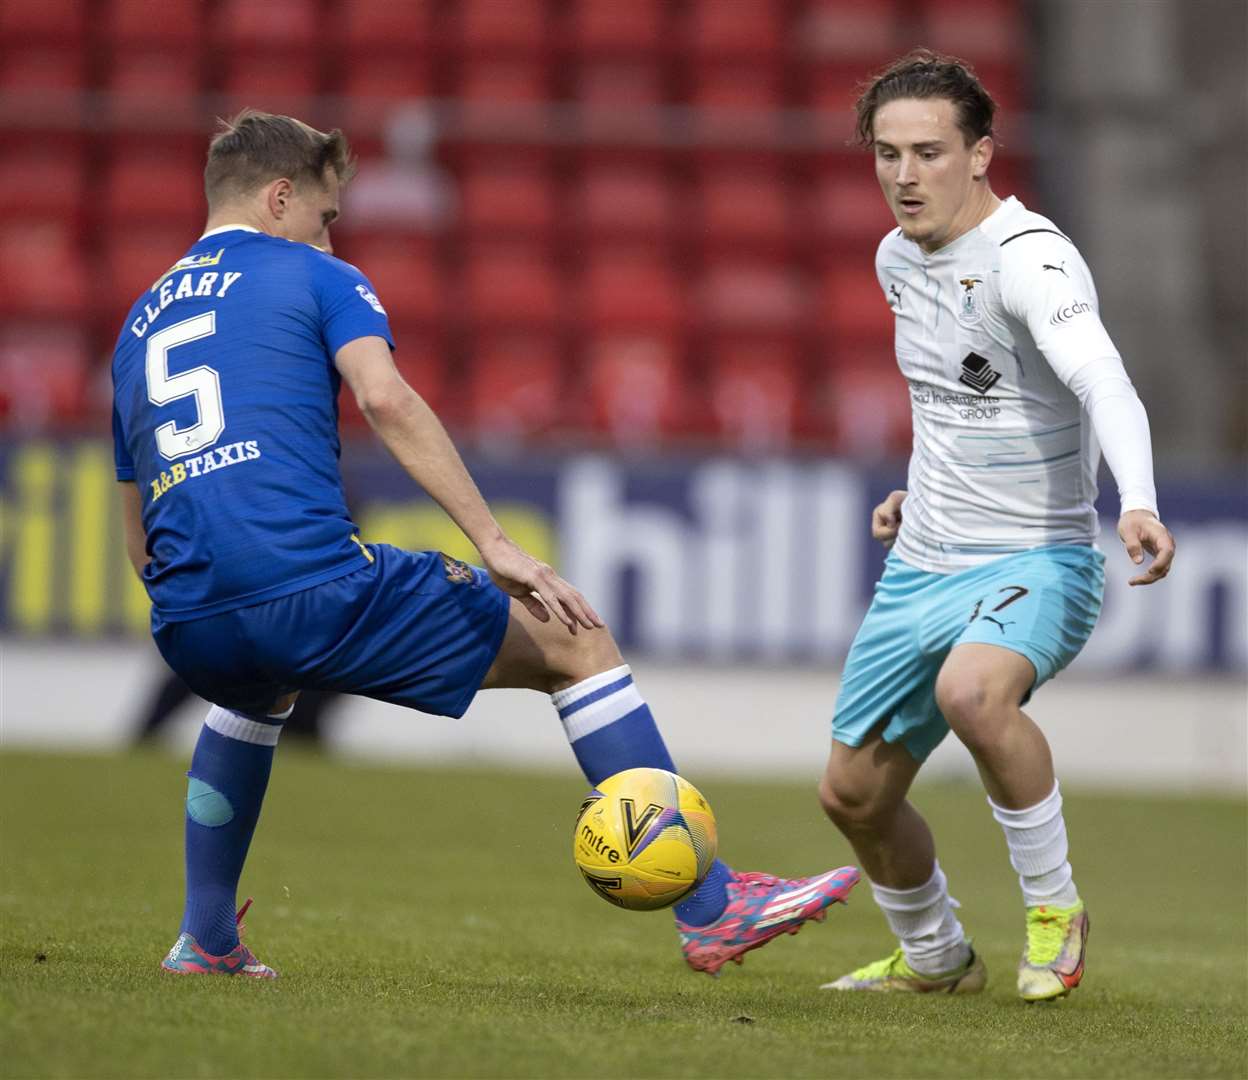 Logan Chalmers playing for Caley Thistle.